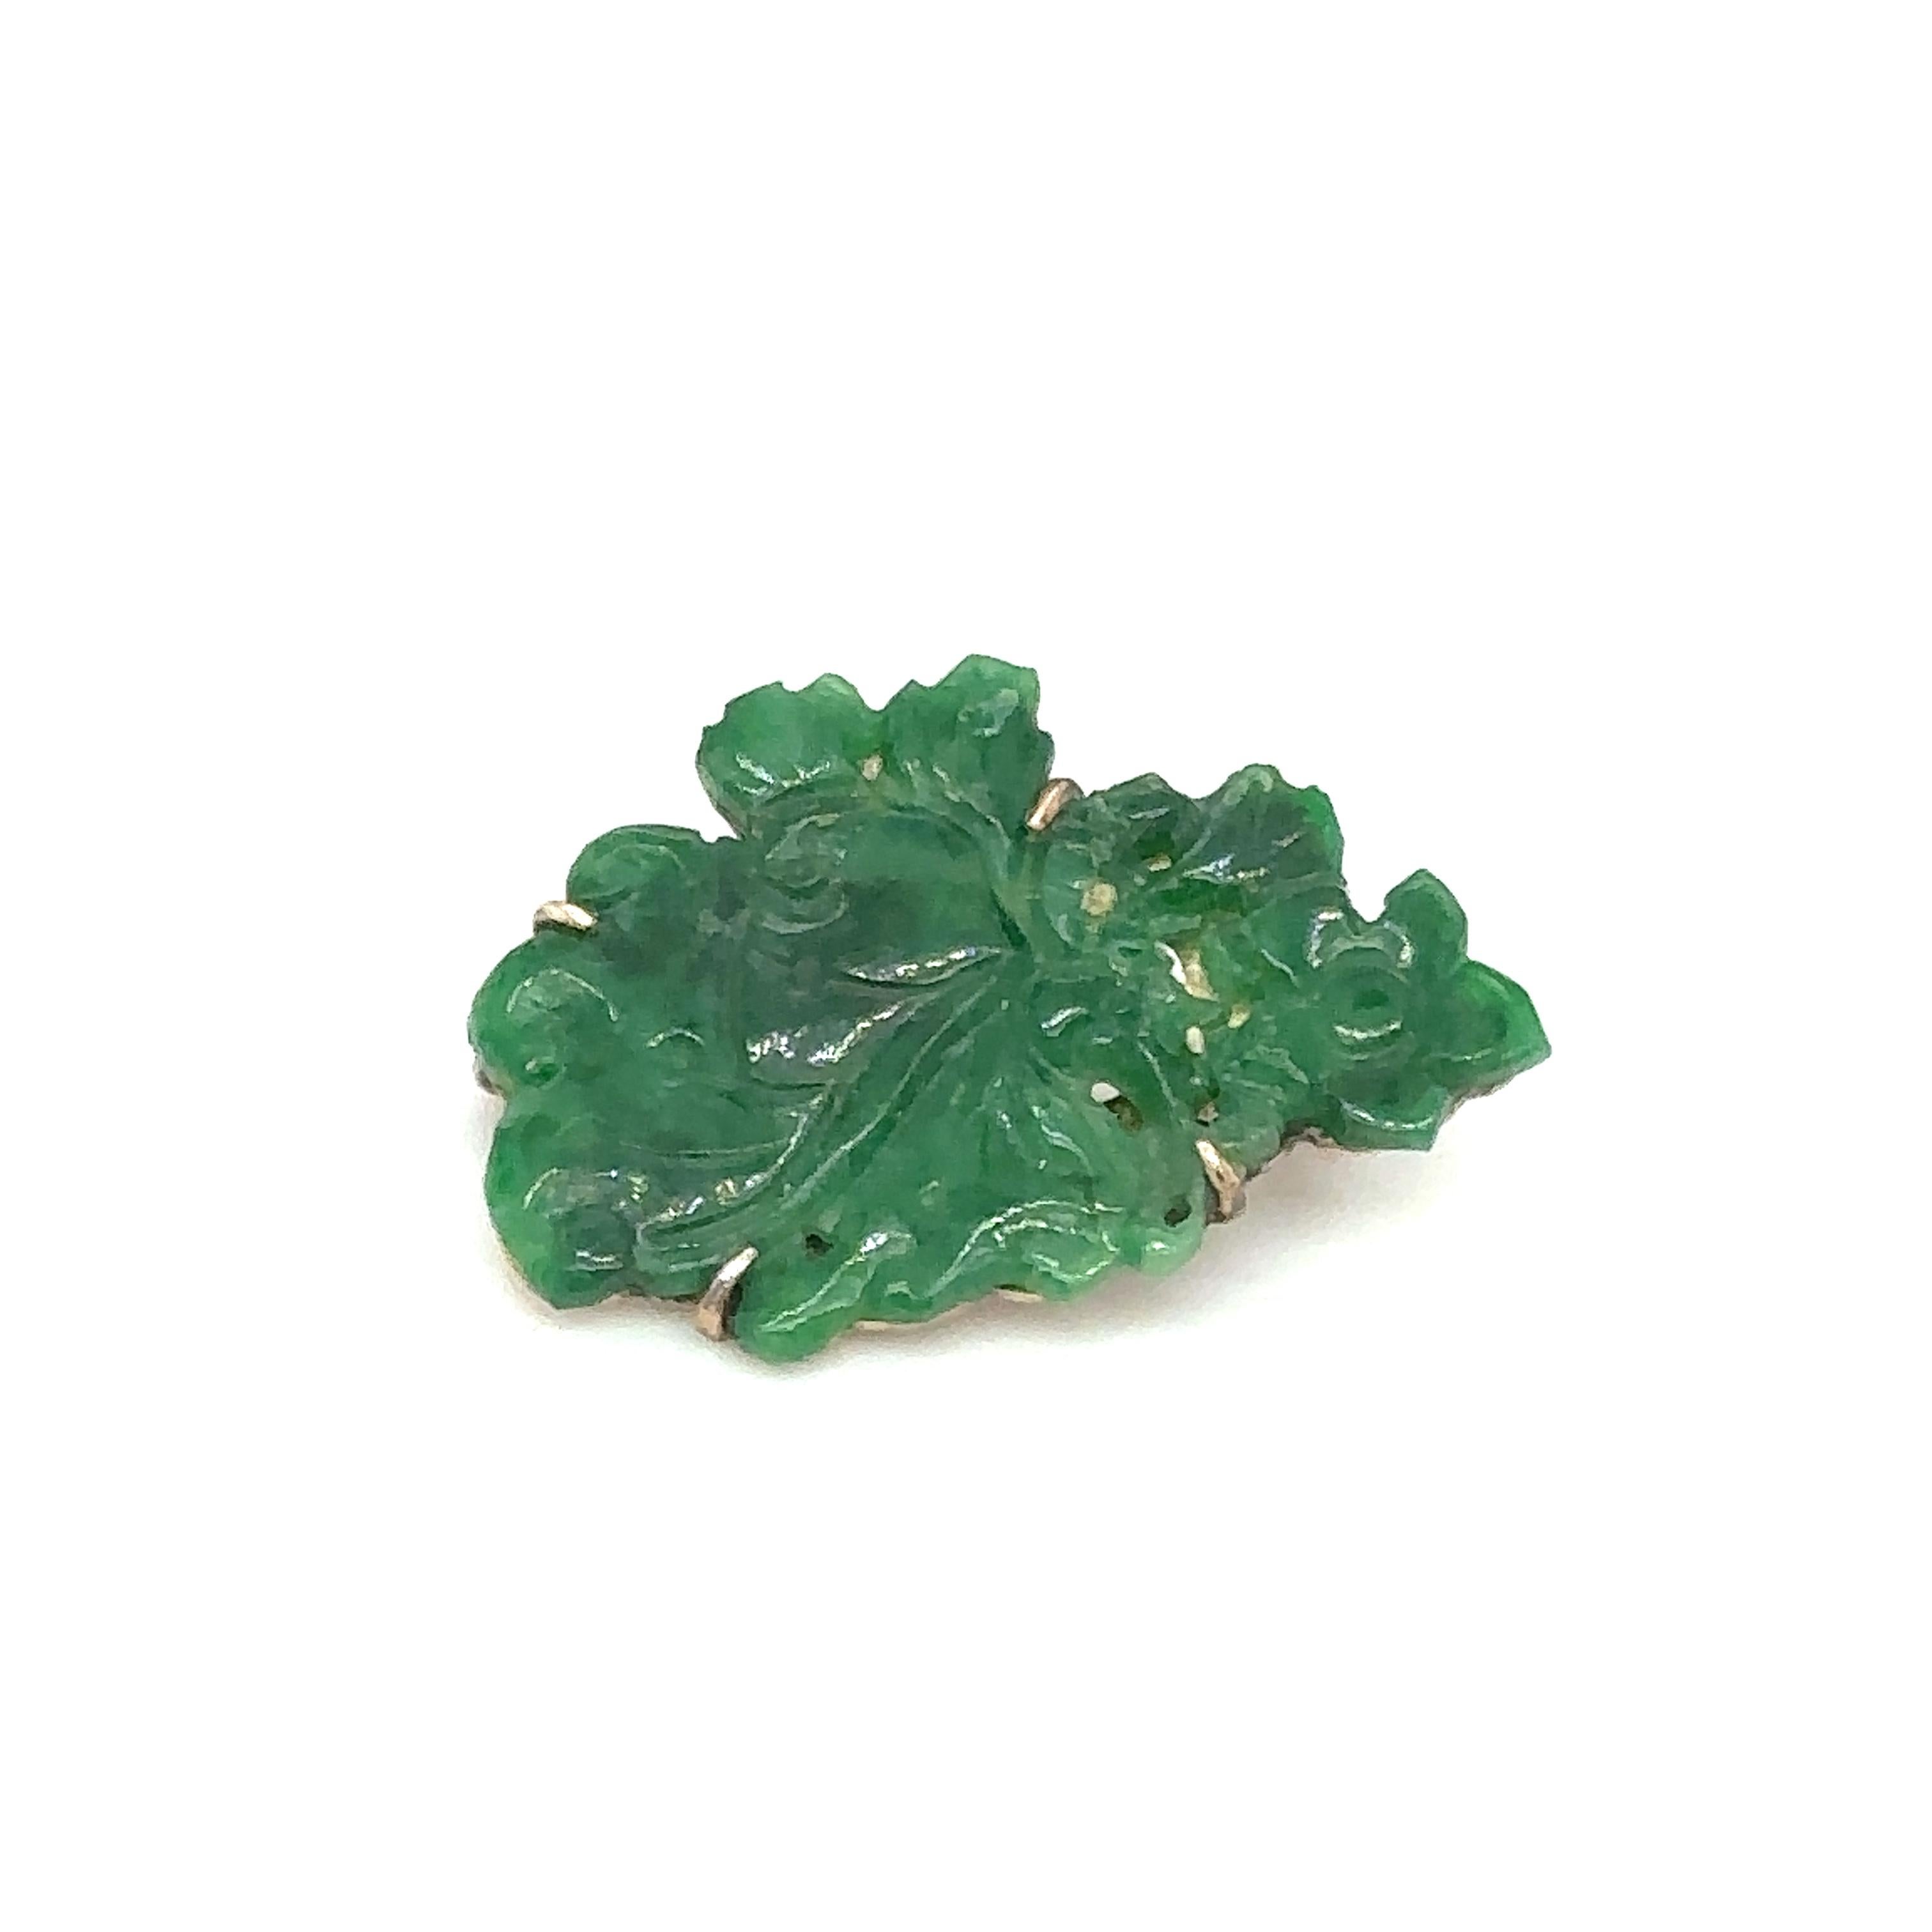 Item Details: This unique brooch dates from the late Victorian period and features a vibrant green jade carving in a foliate design.

Circa: 1890s
Metal Type: 14 Karat Yellow Gold
Weight: 3.2 grams 
Size: 1 inch approximately 